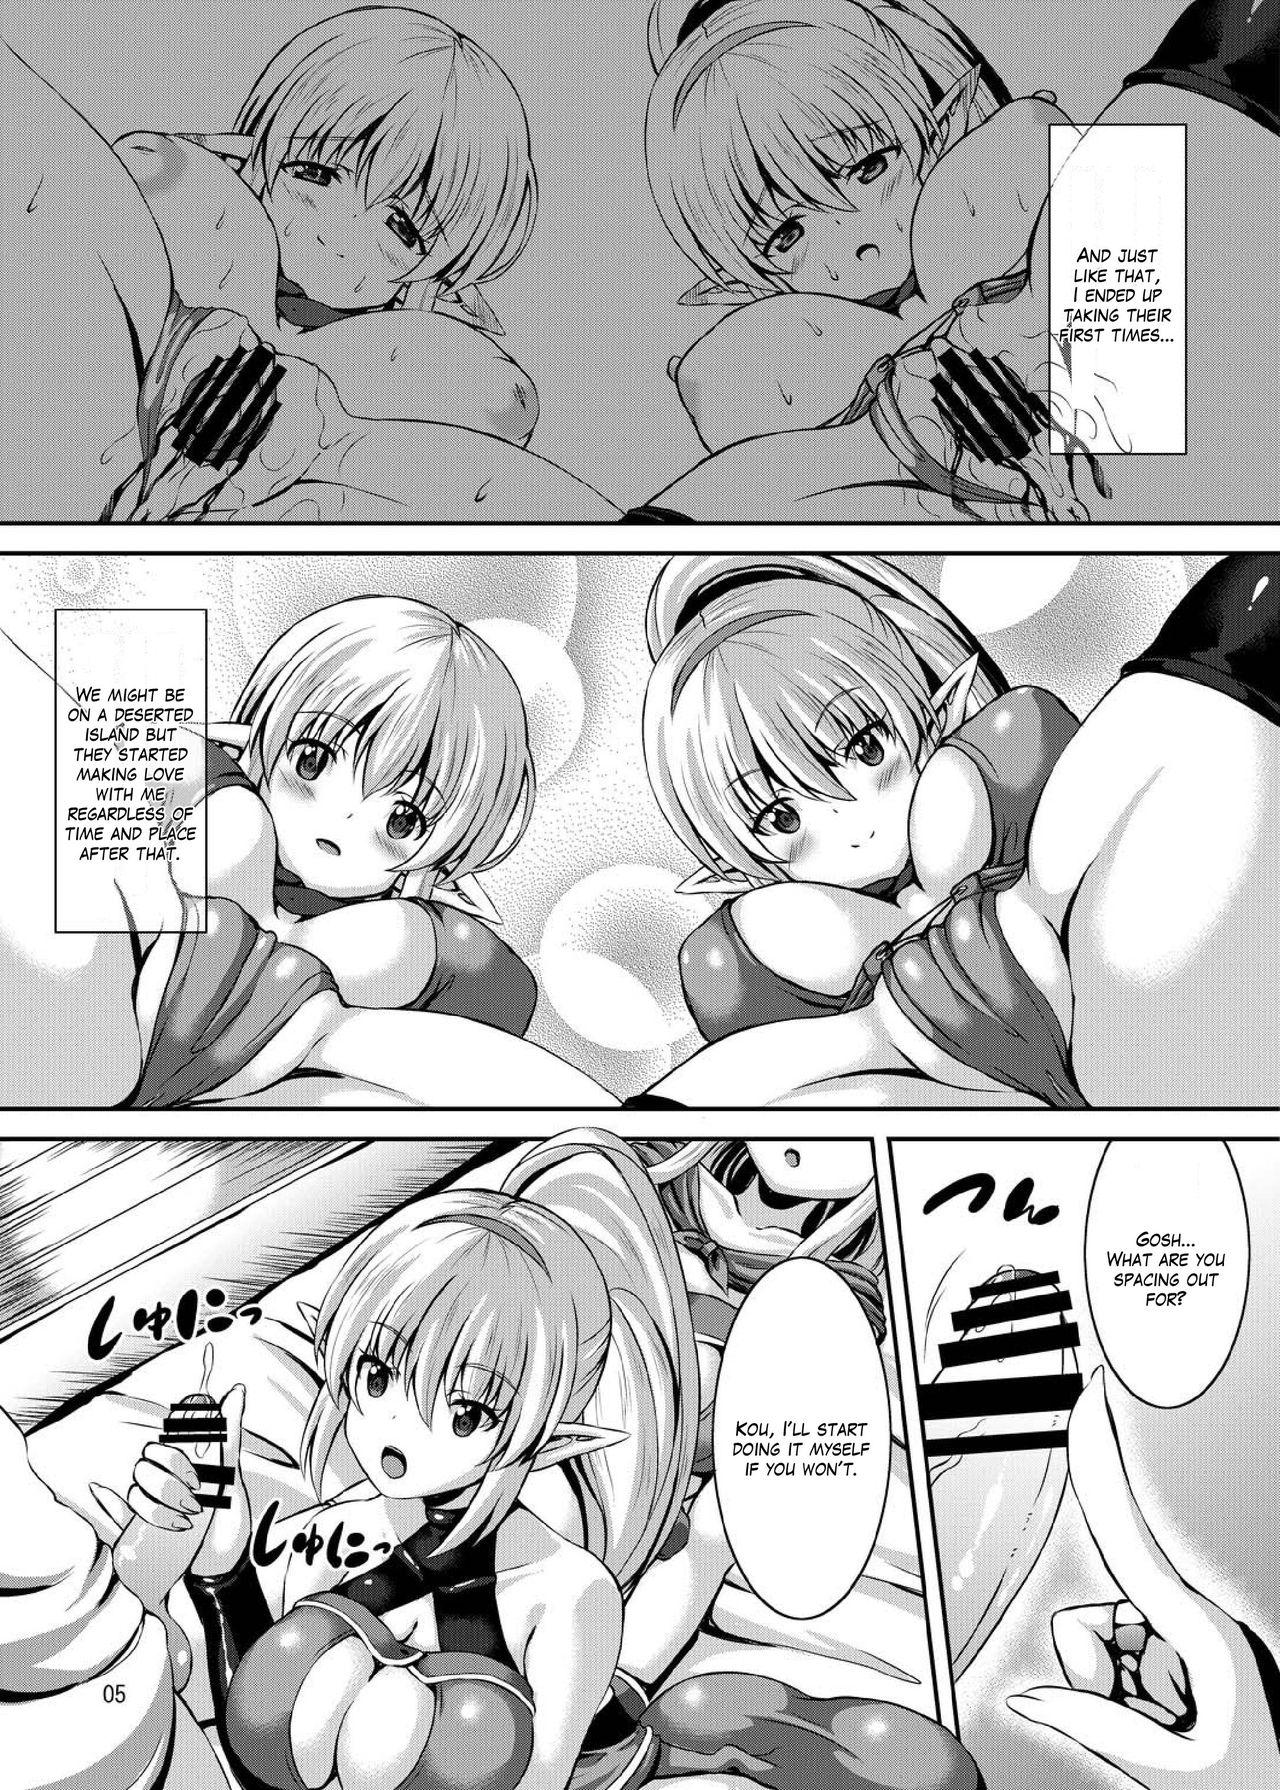 Dorm Boku to Isekai no Onee-san | Me and The Ladies from Another World - Original Exhib - Page 5